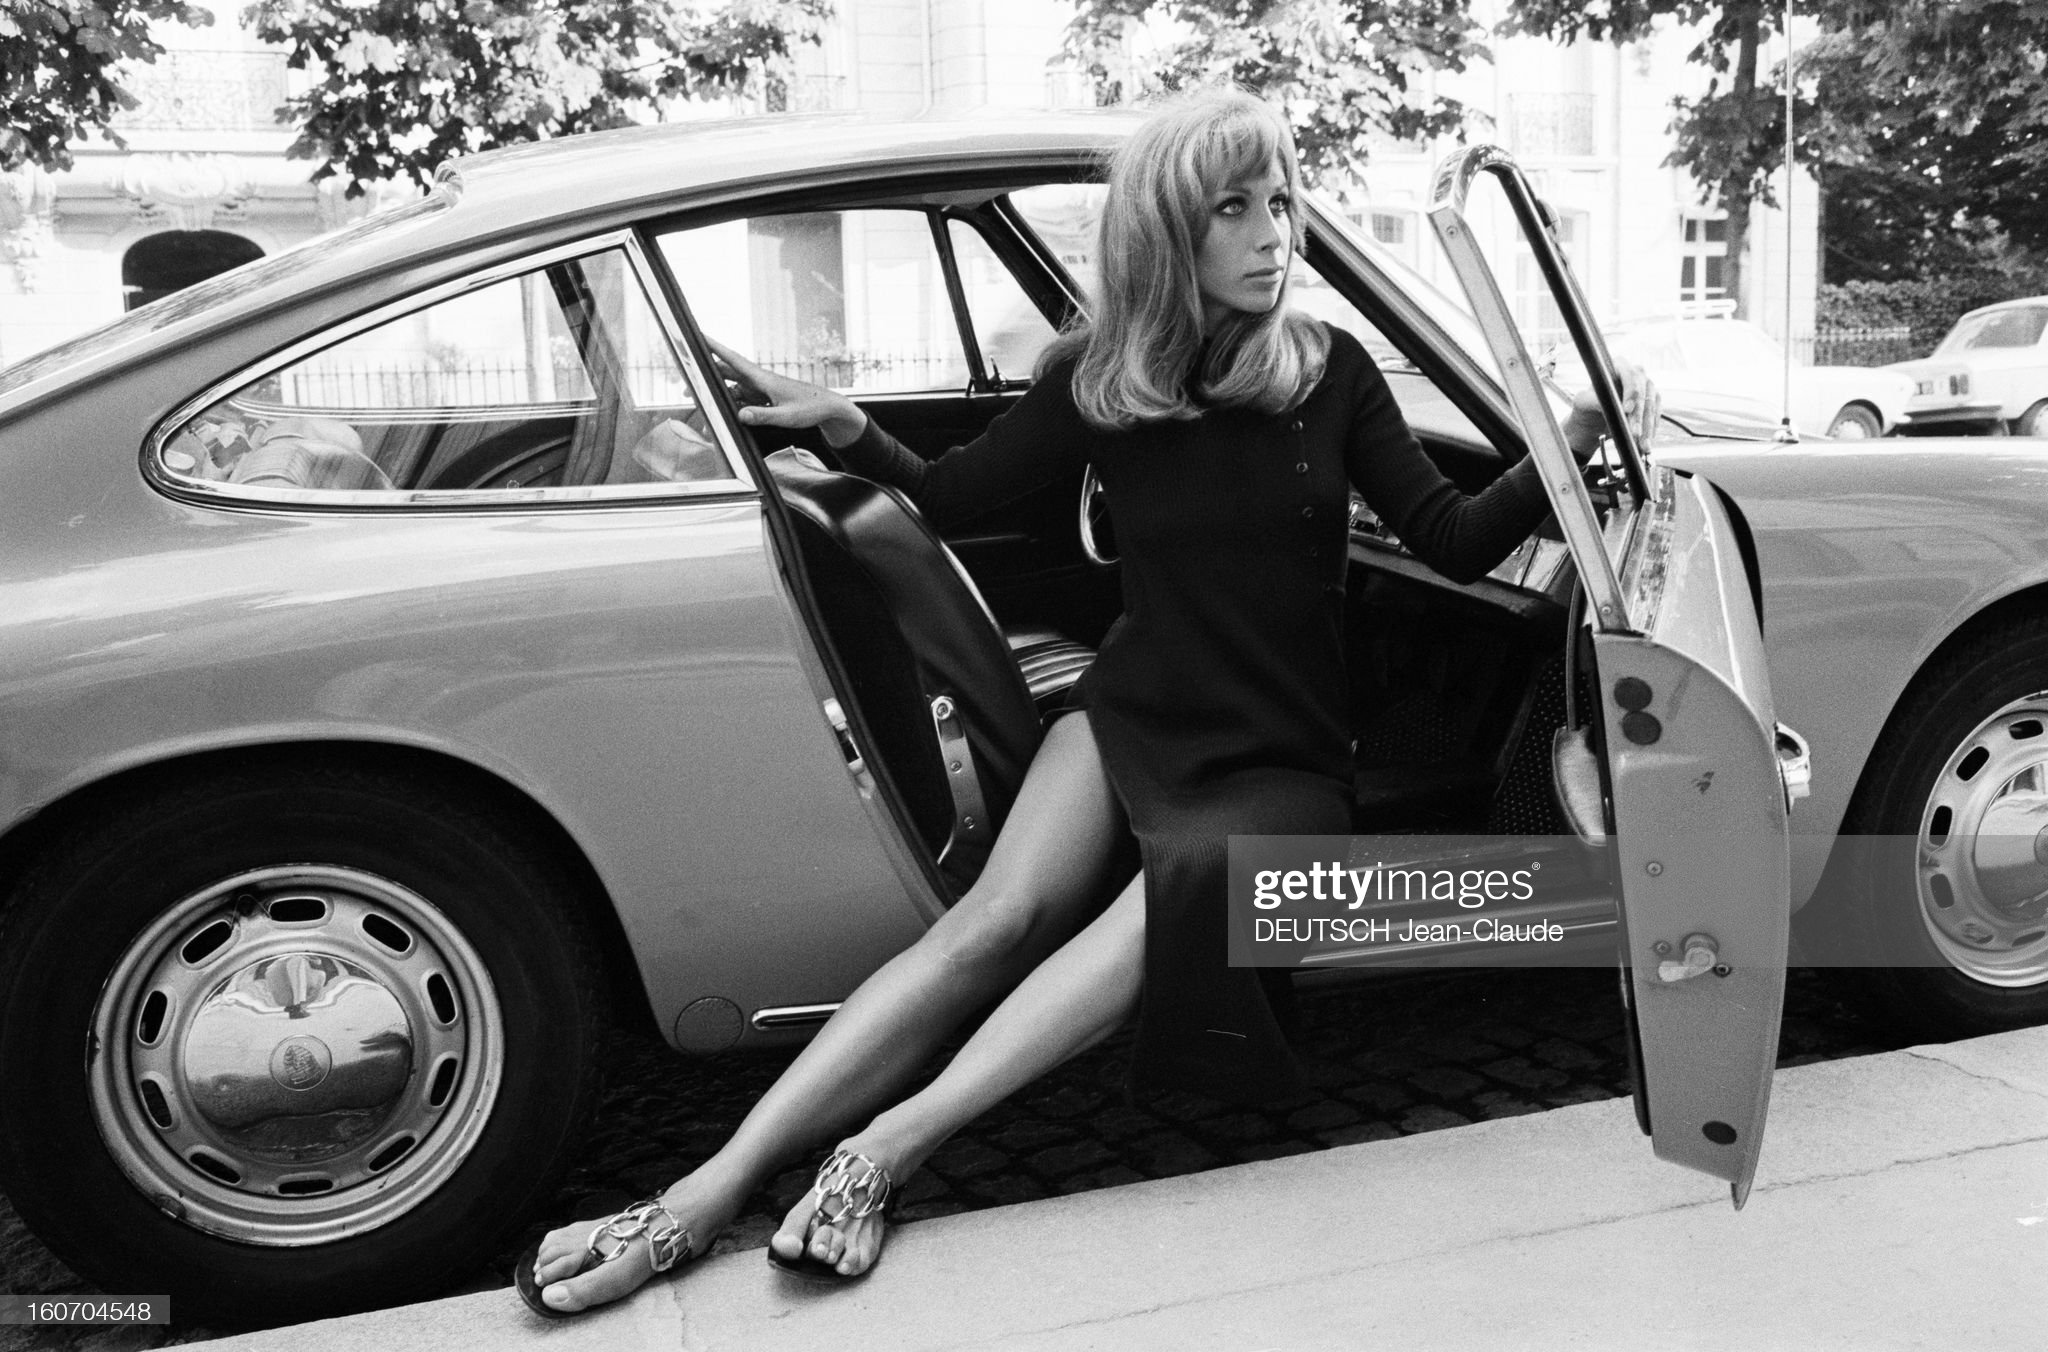 Paris, August 12, 1970. Tanya Lopert, American, posing seated on the front passenger side seat of a Porsche.